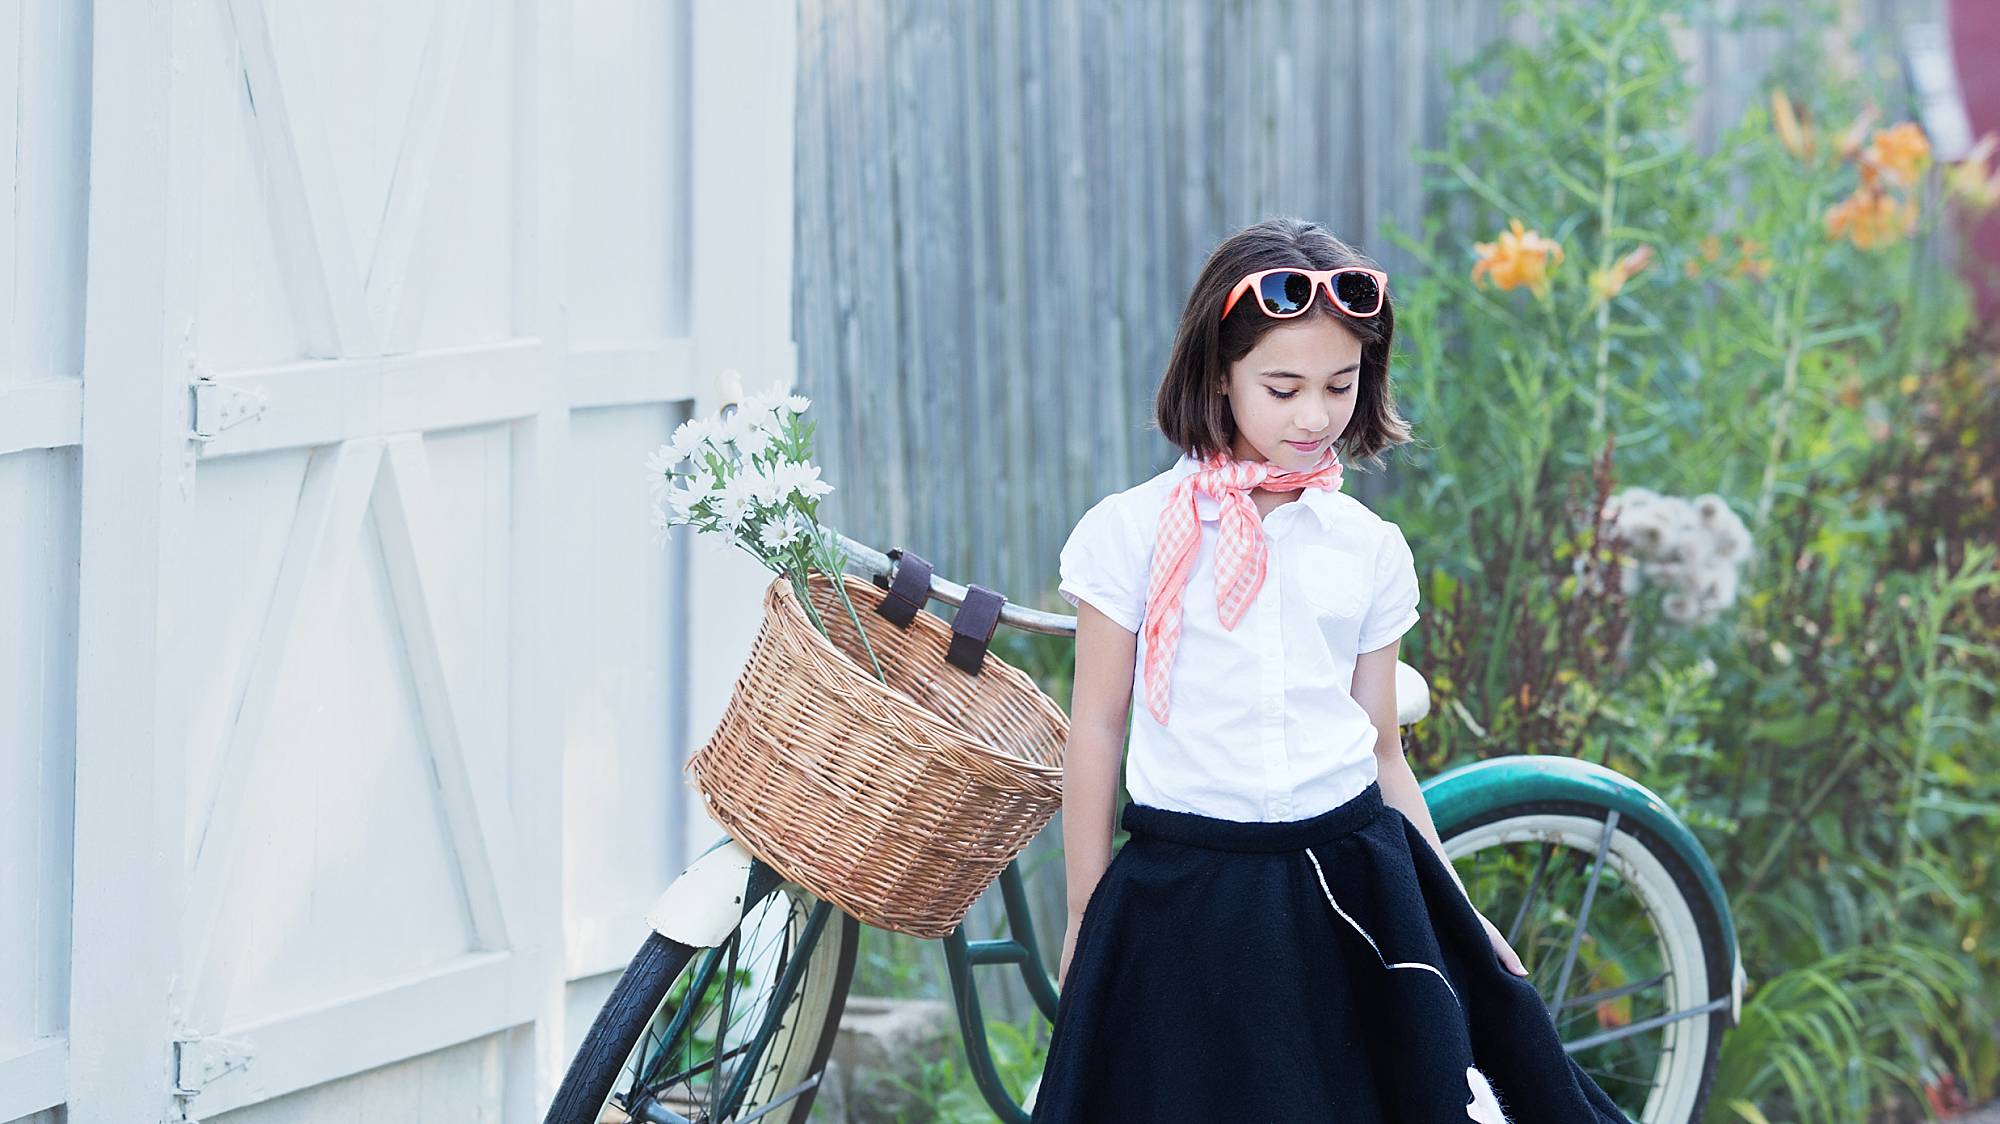 image of a little girl with short dark hair, looking down and standing next to an old fashioned bicycle with a wicker basket and daisies